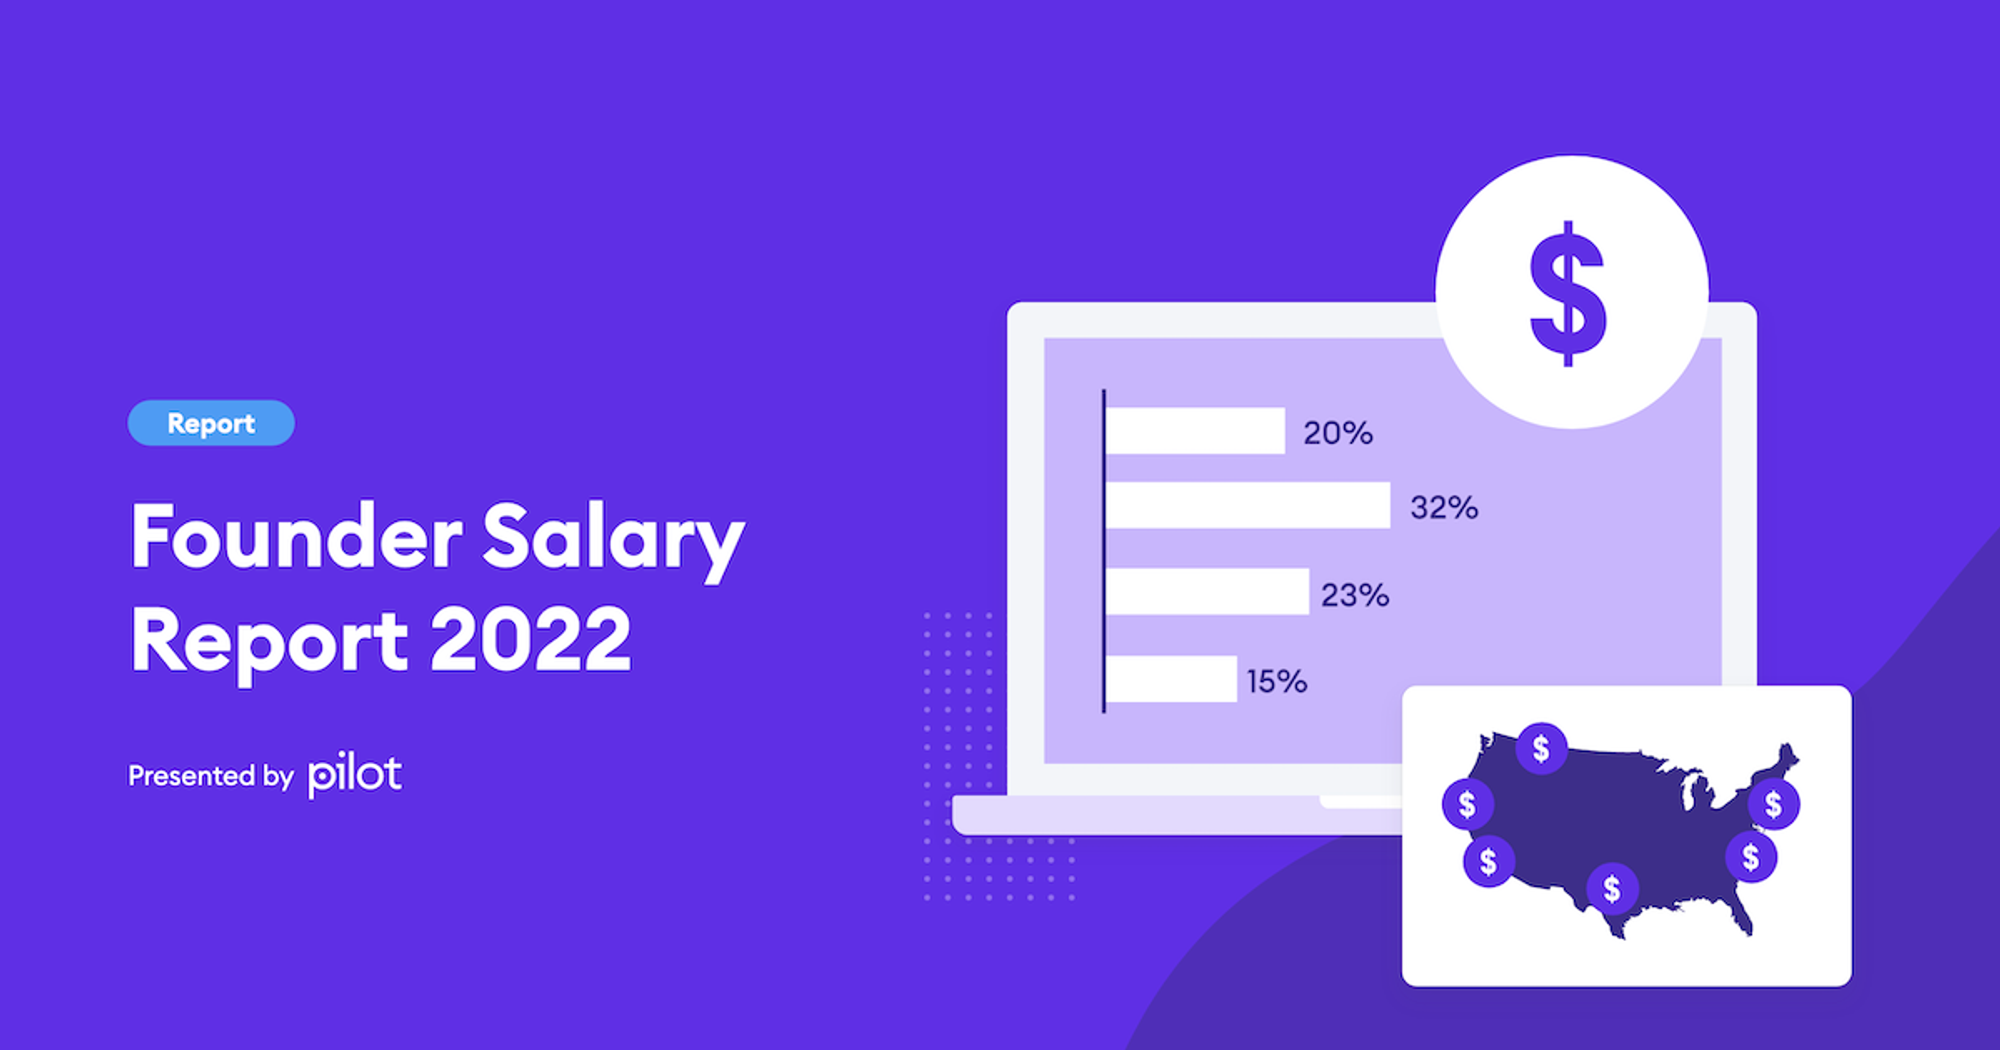 The 2022 Founder Salary Report